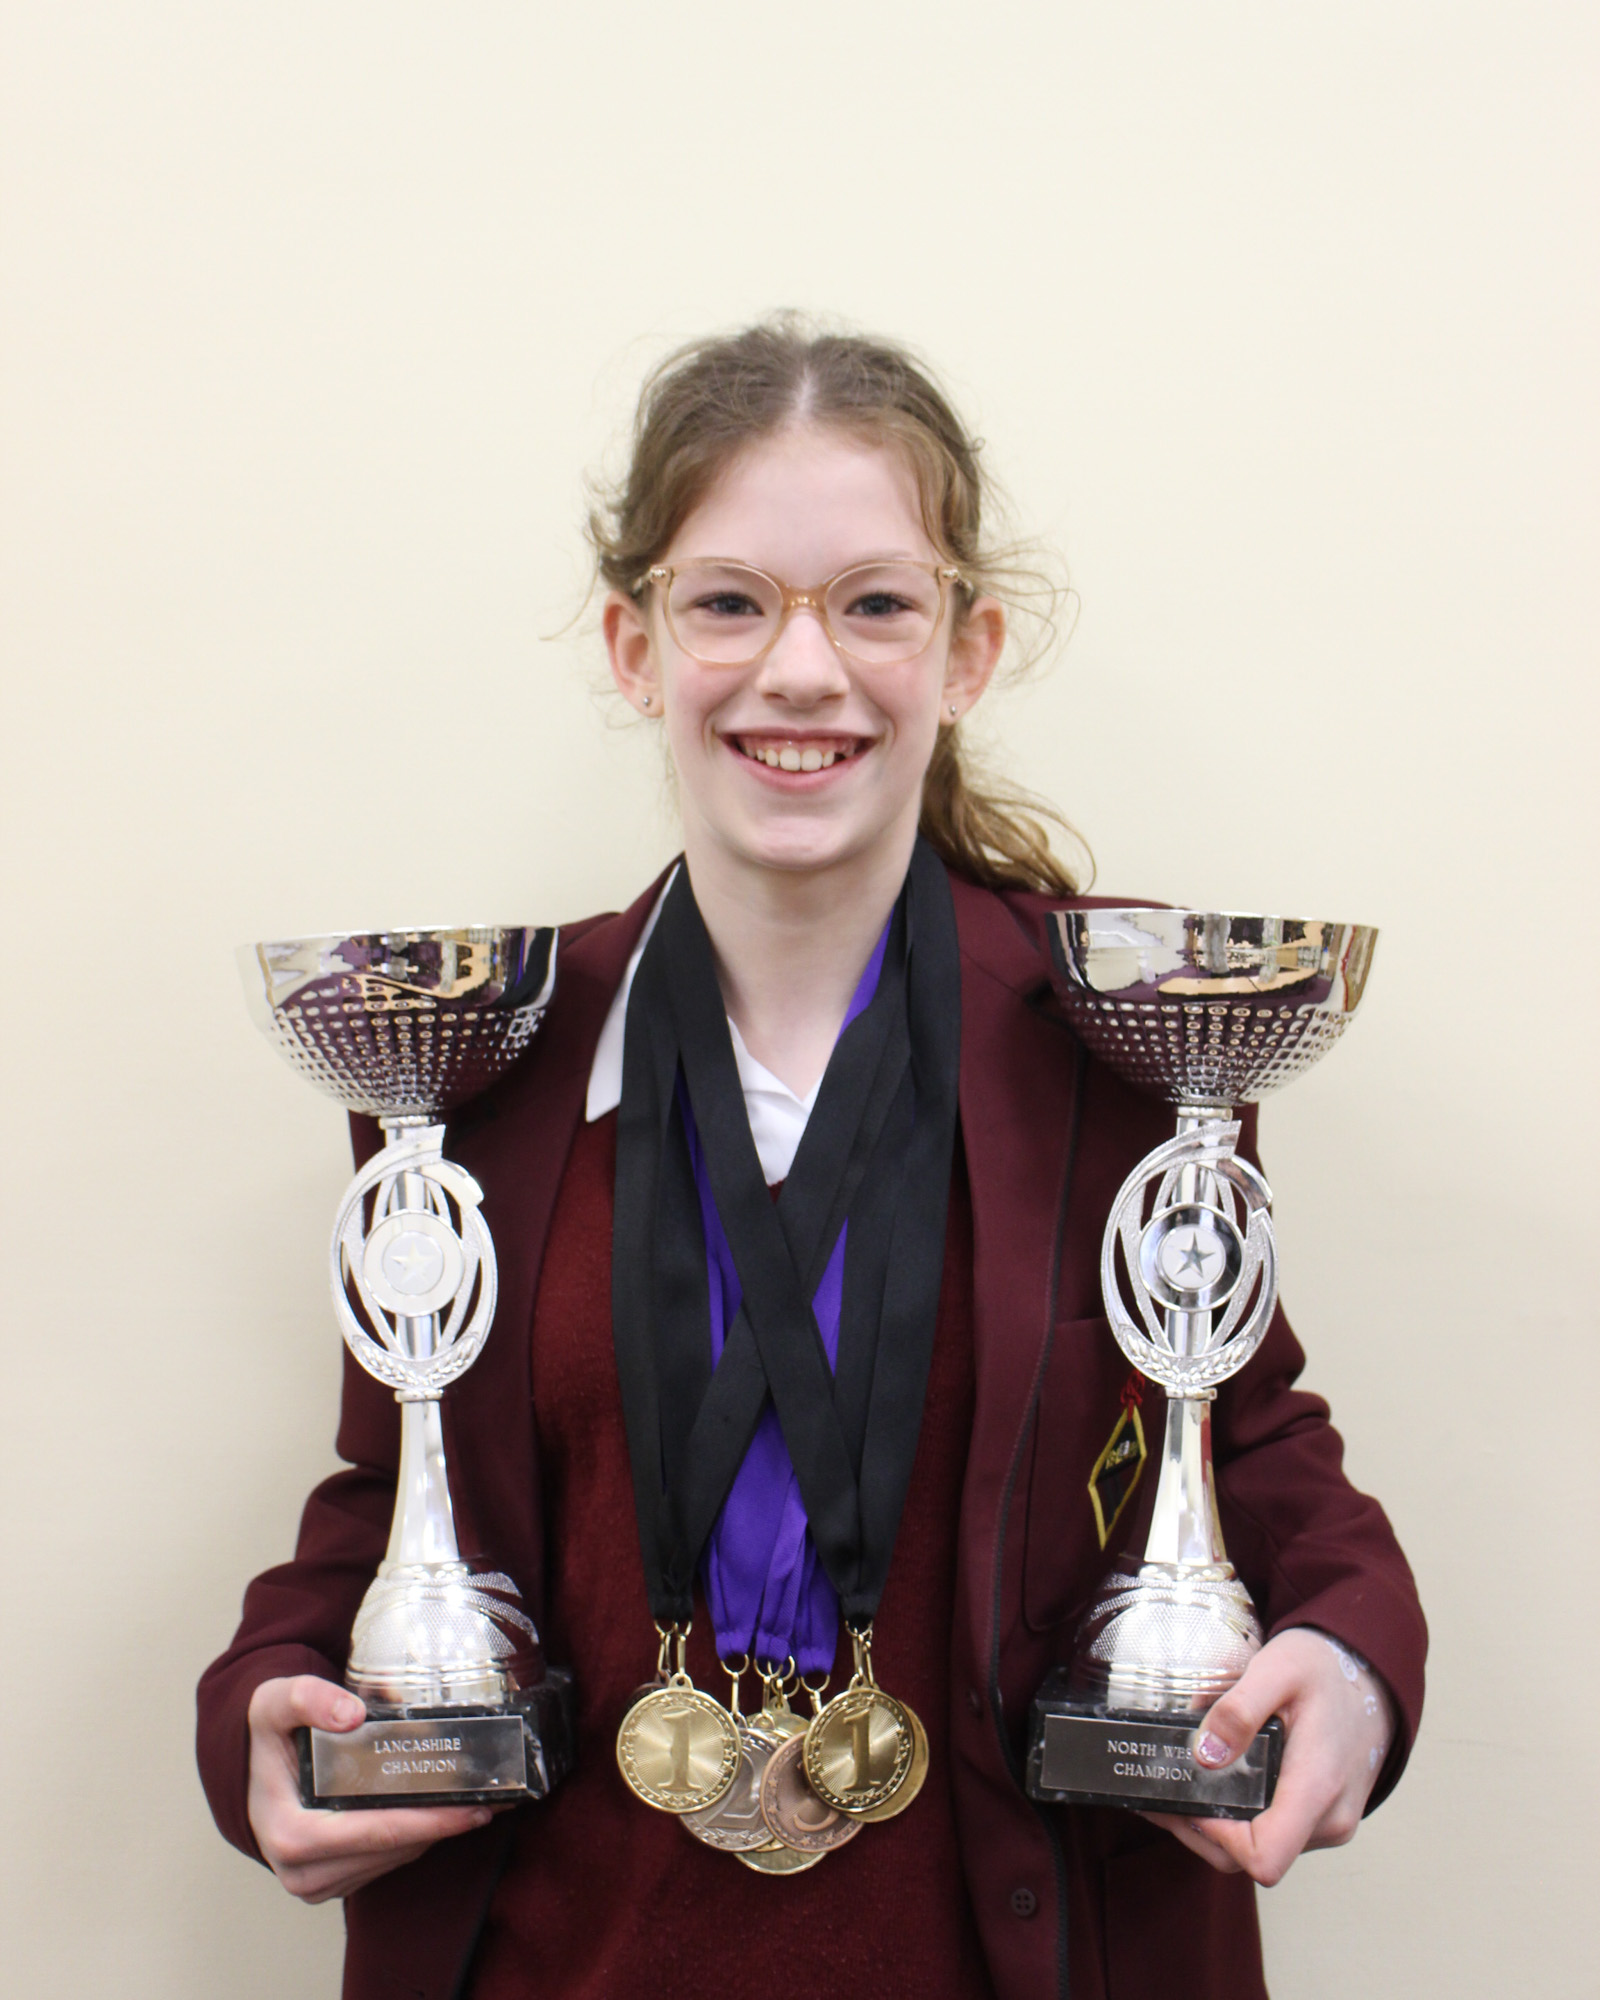 Ruby in school with her trophies and medals